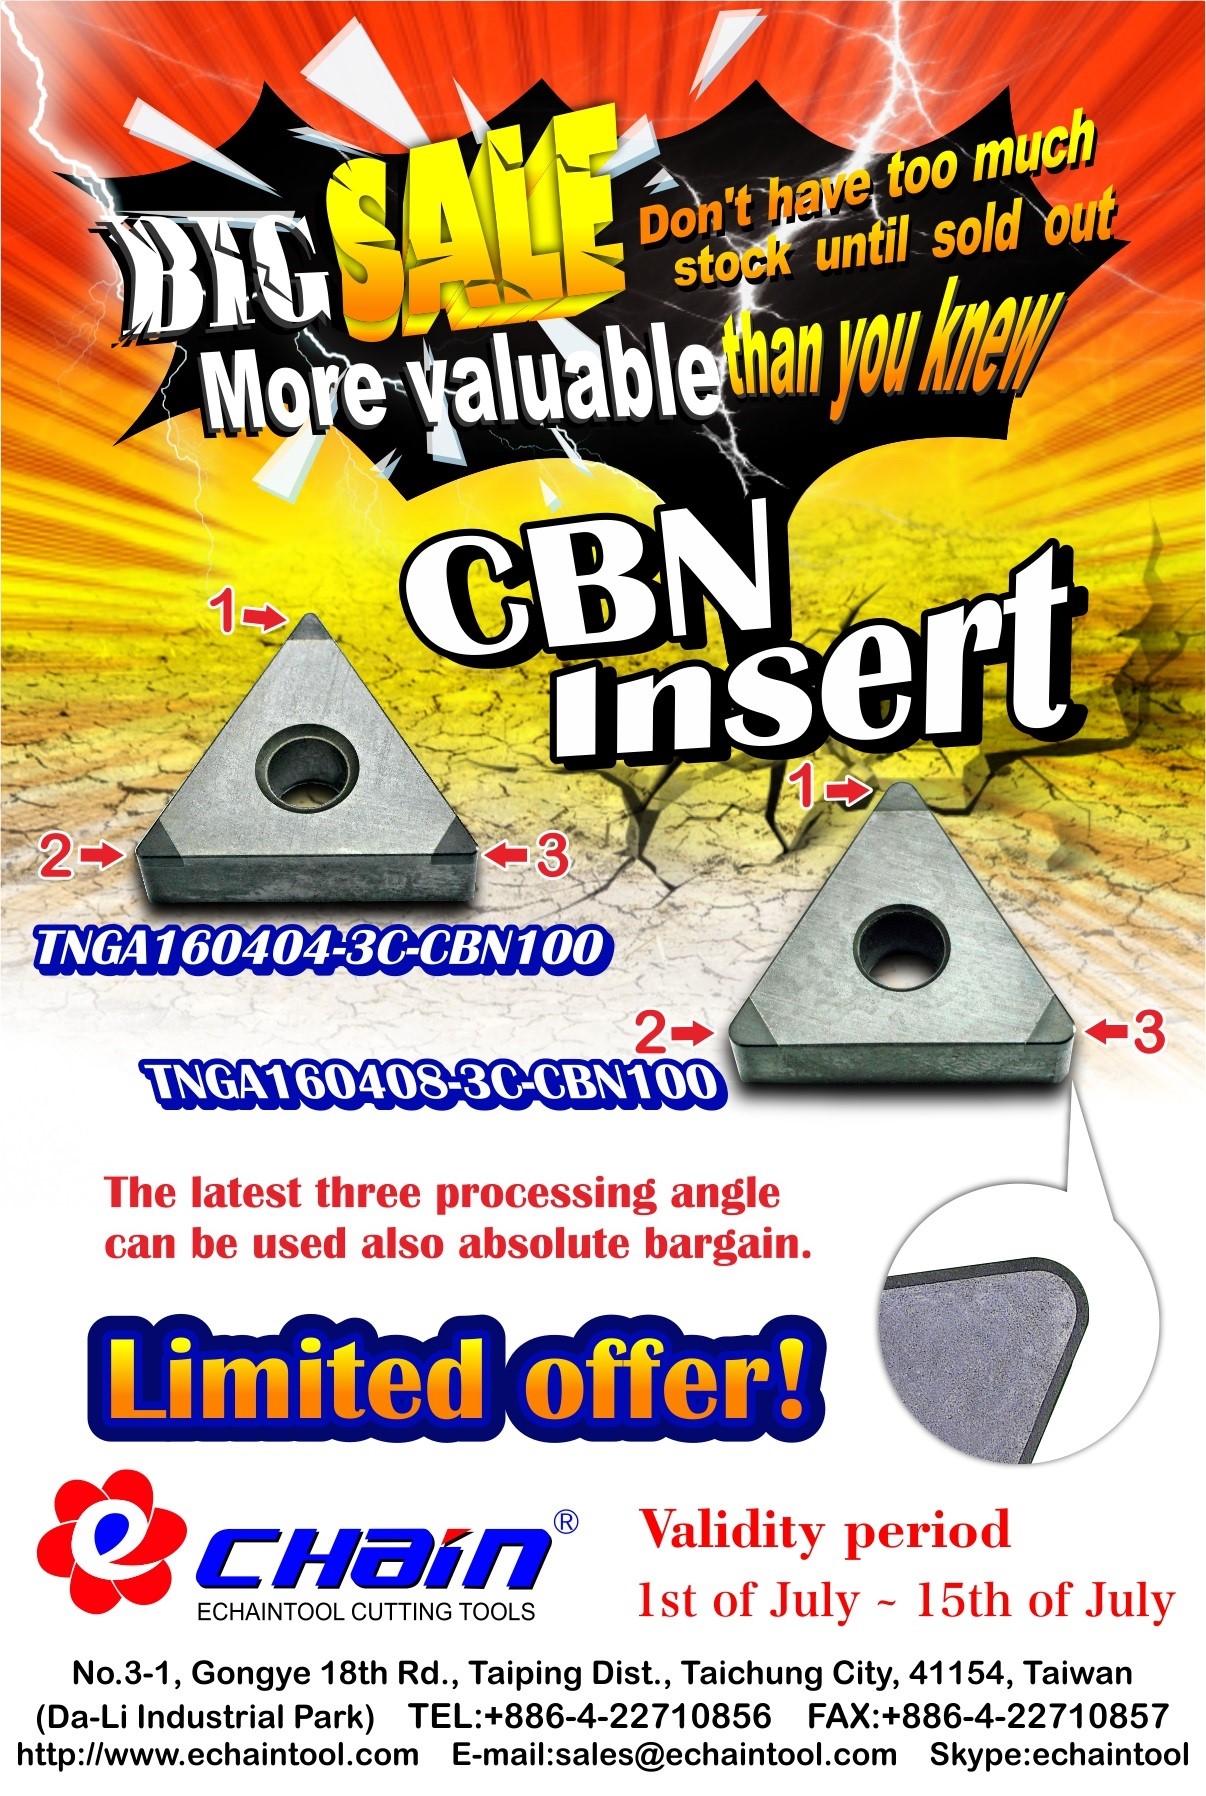 CNB inserts made in Taiwan for hard metal turning